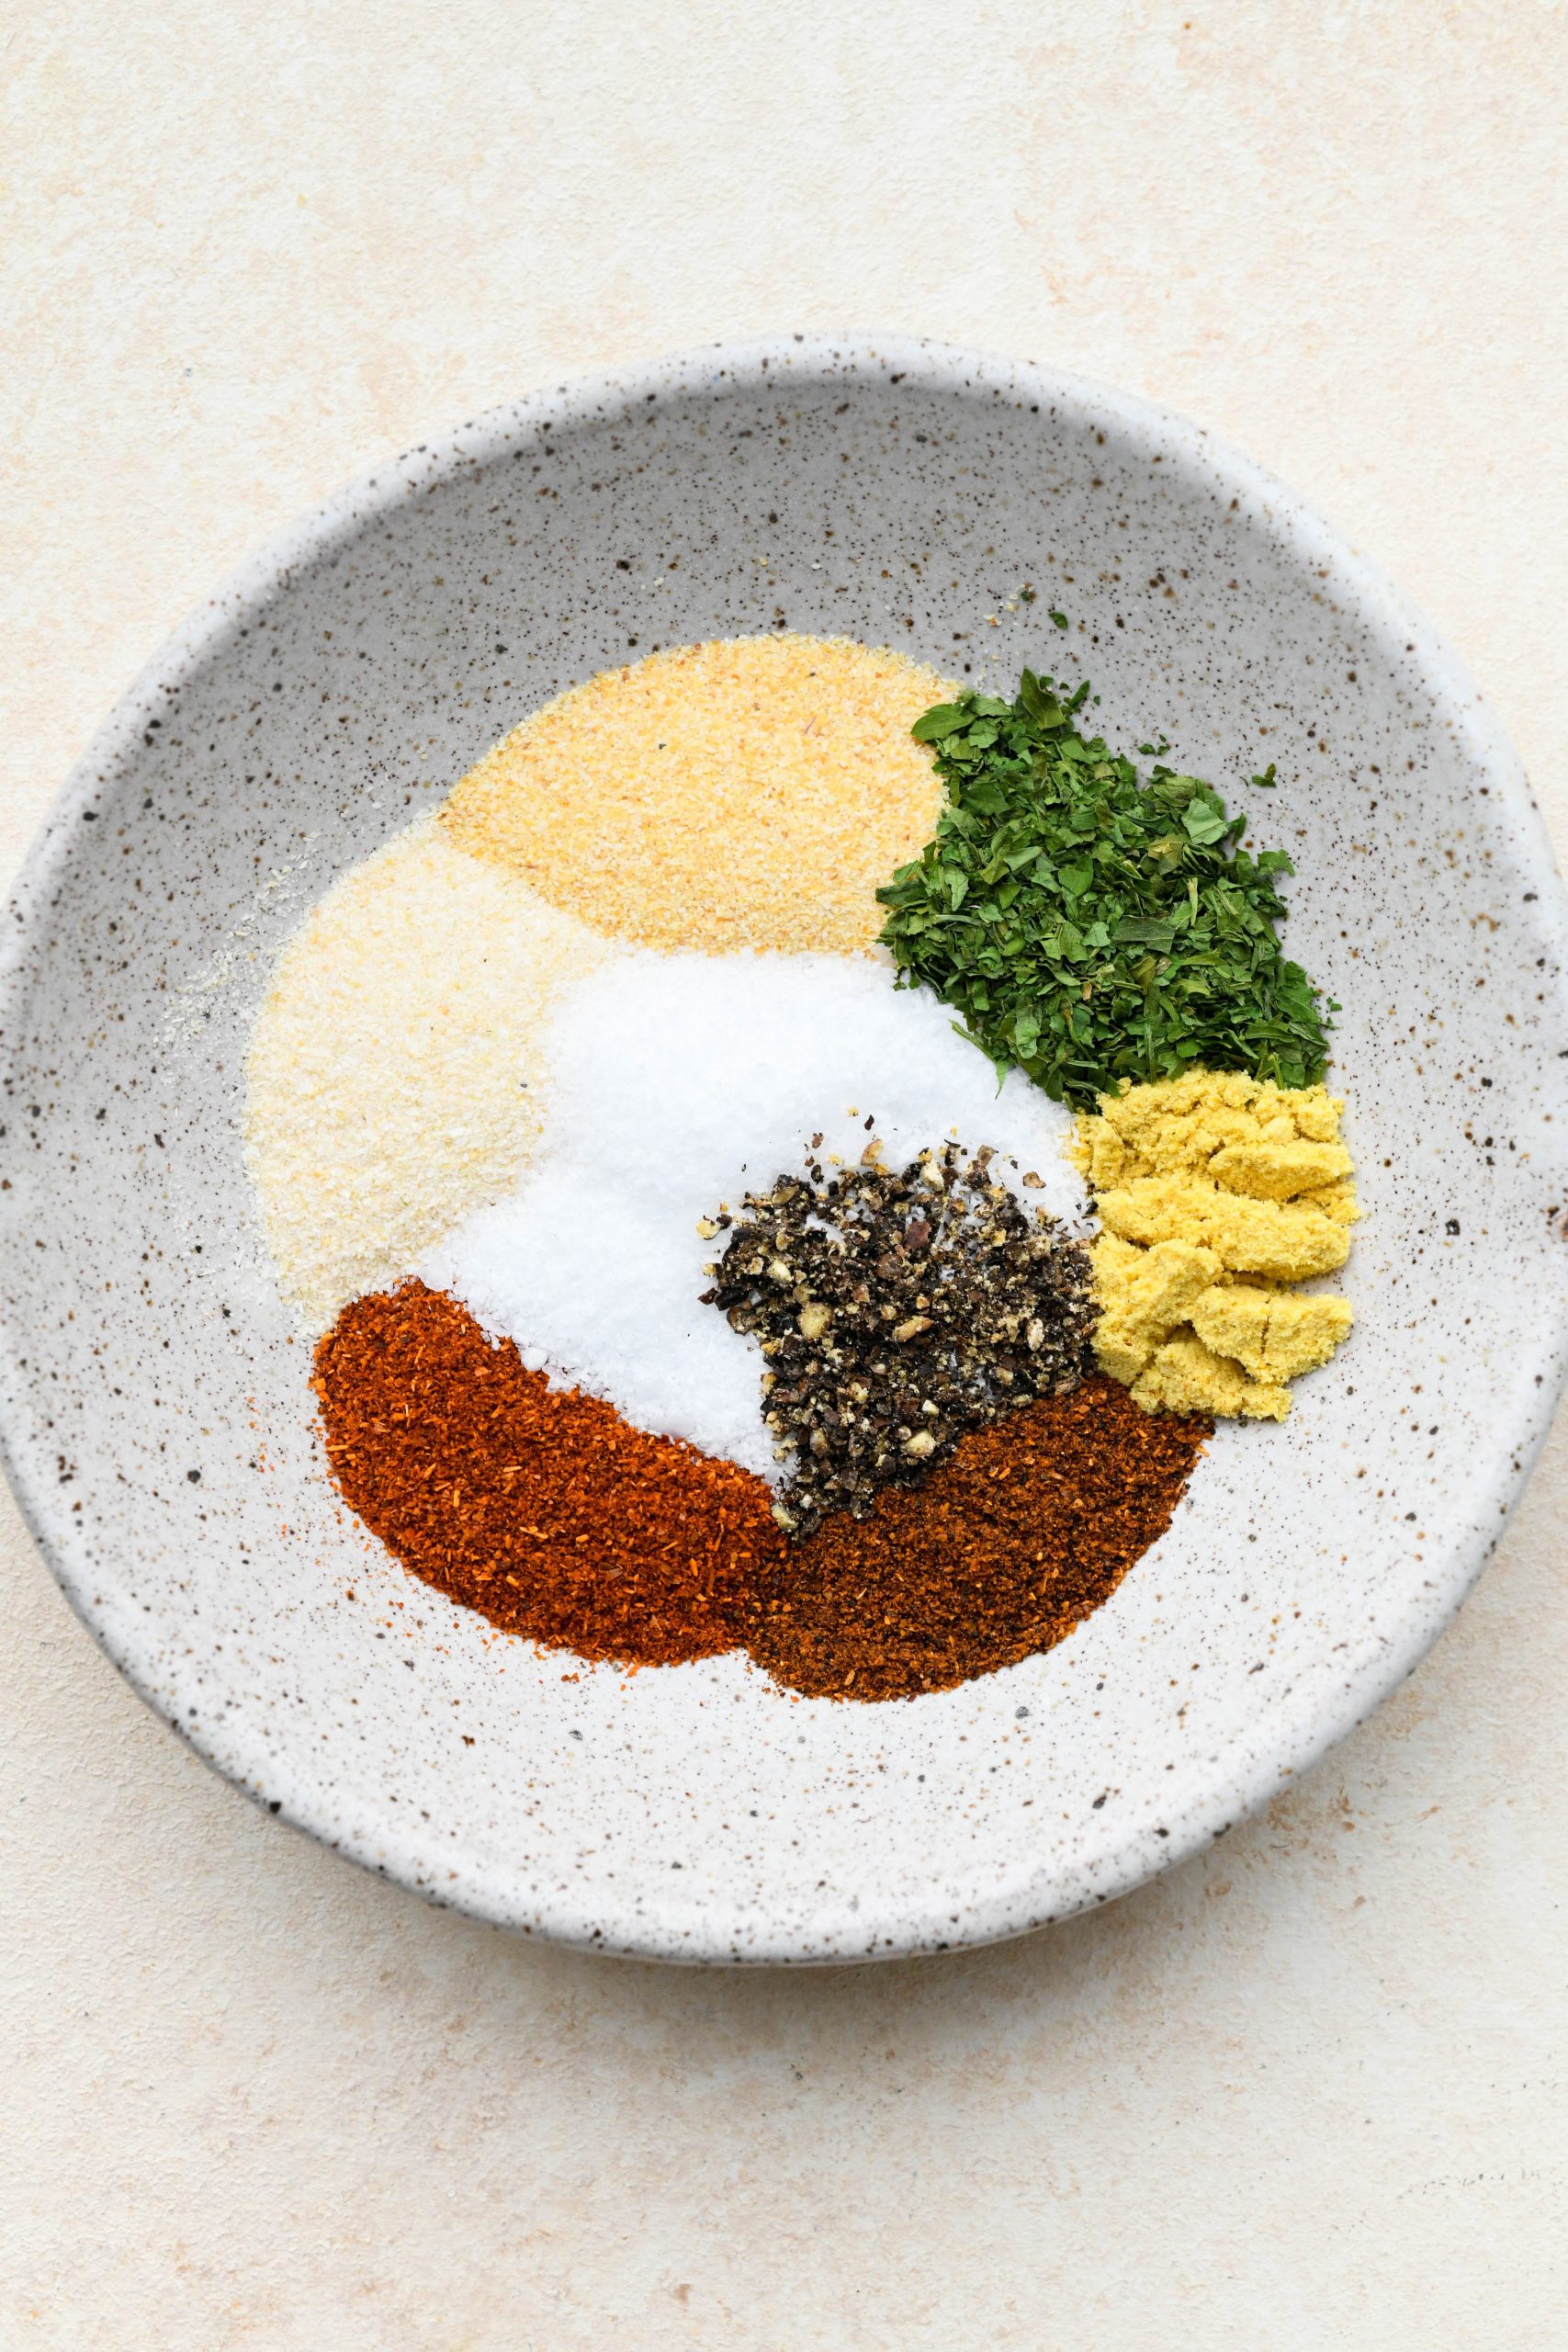 Spices for baked chicken breasts in a small ceramic dish